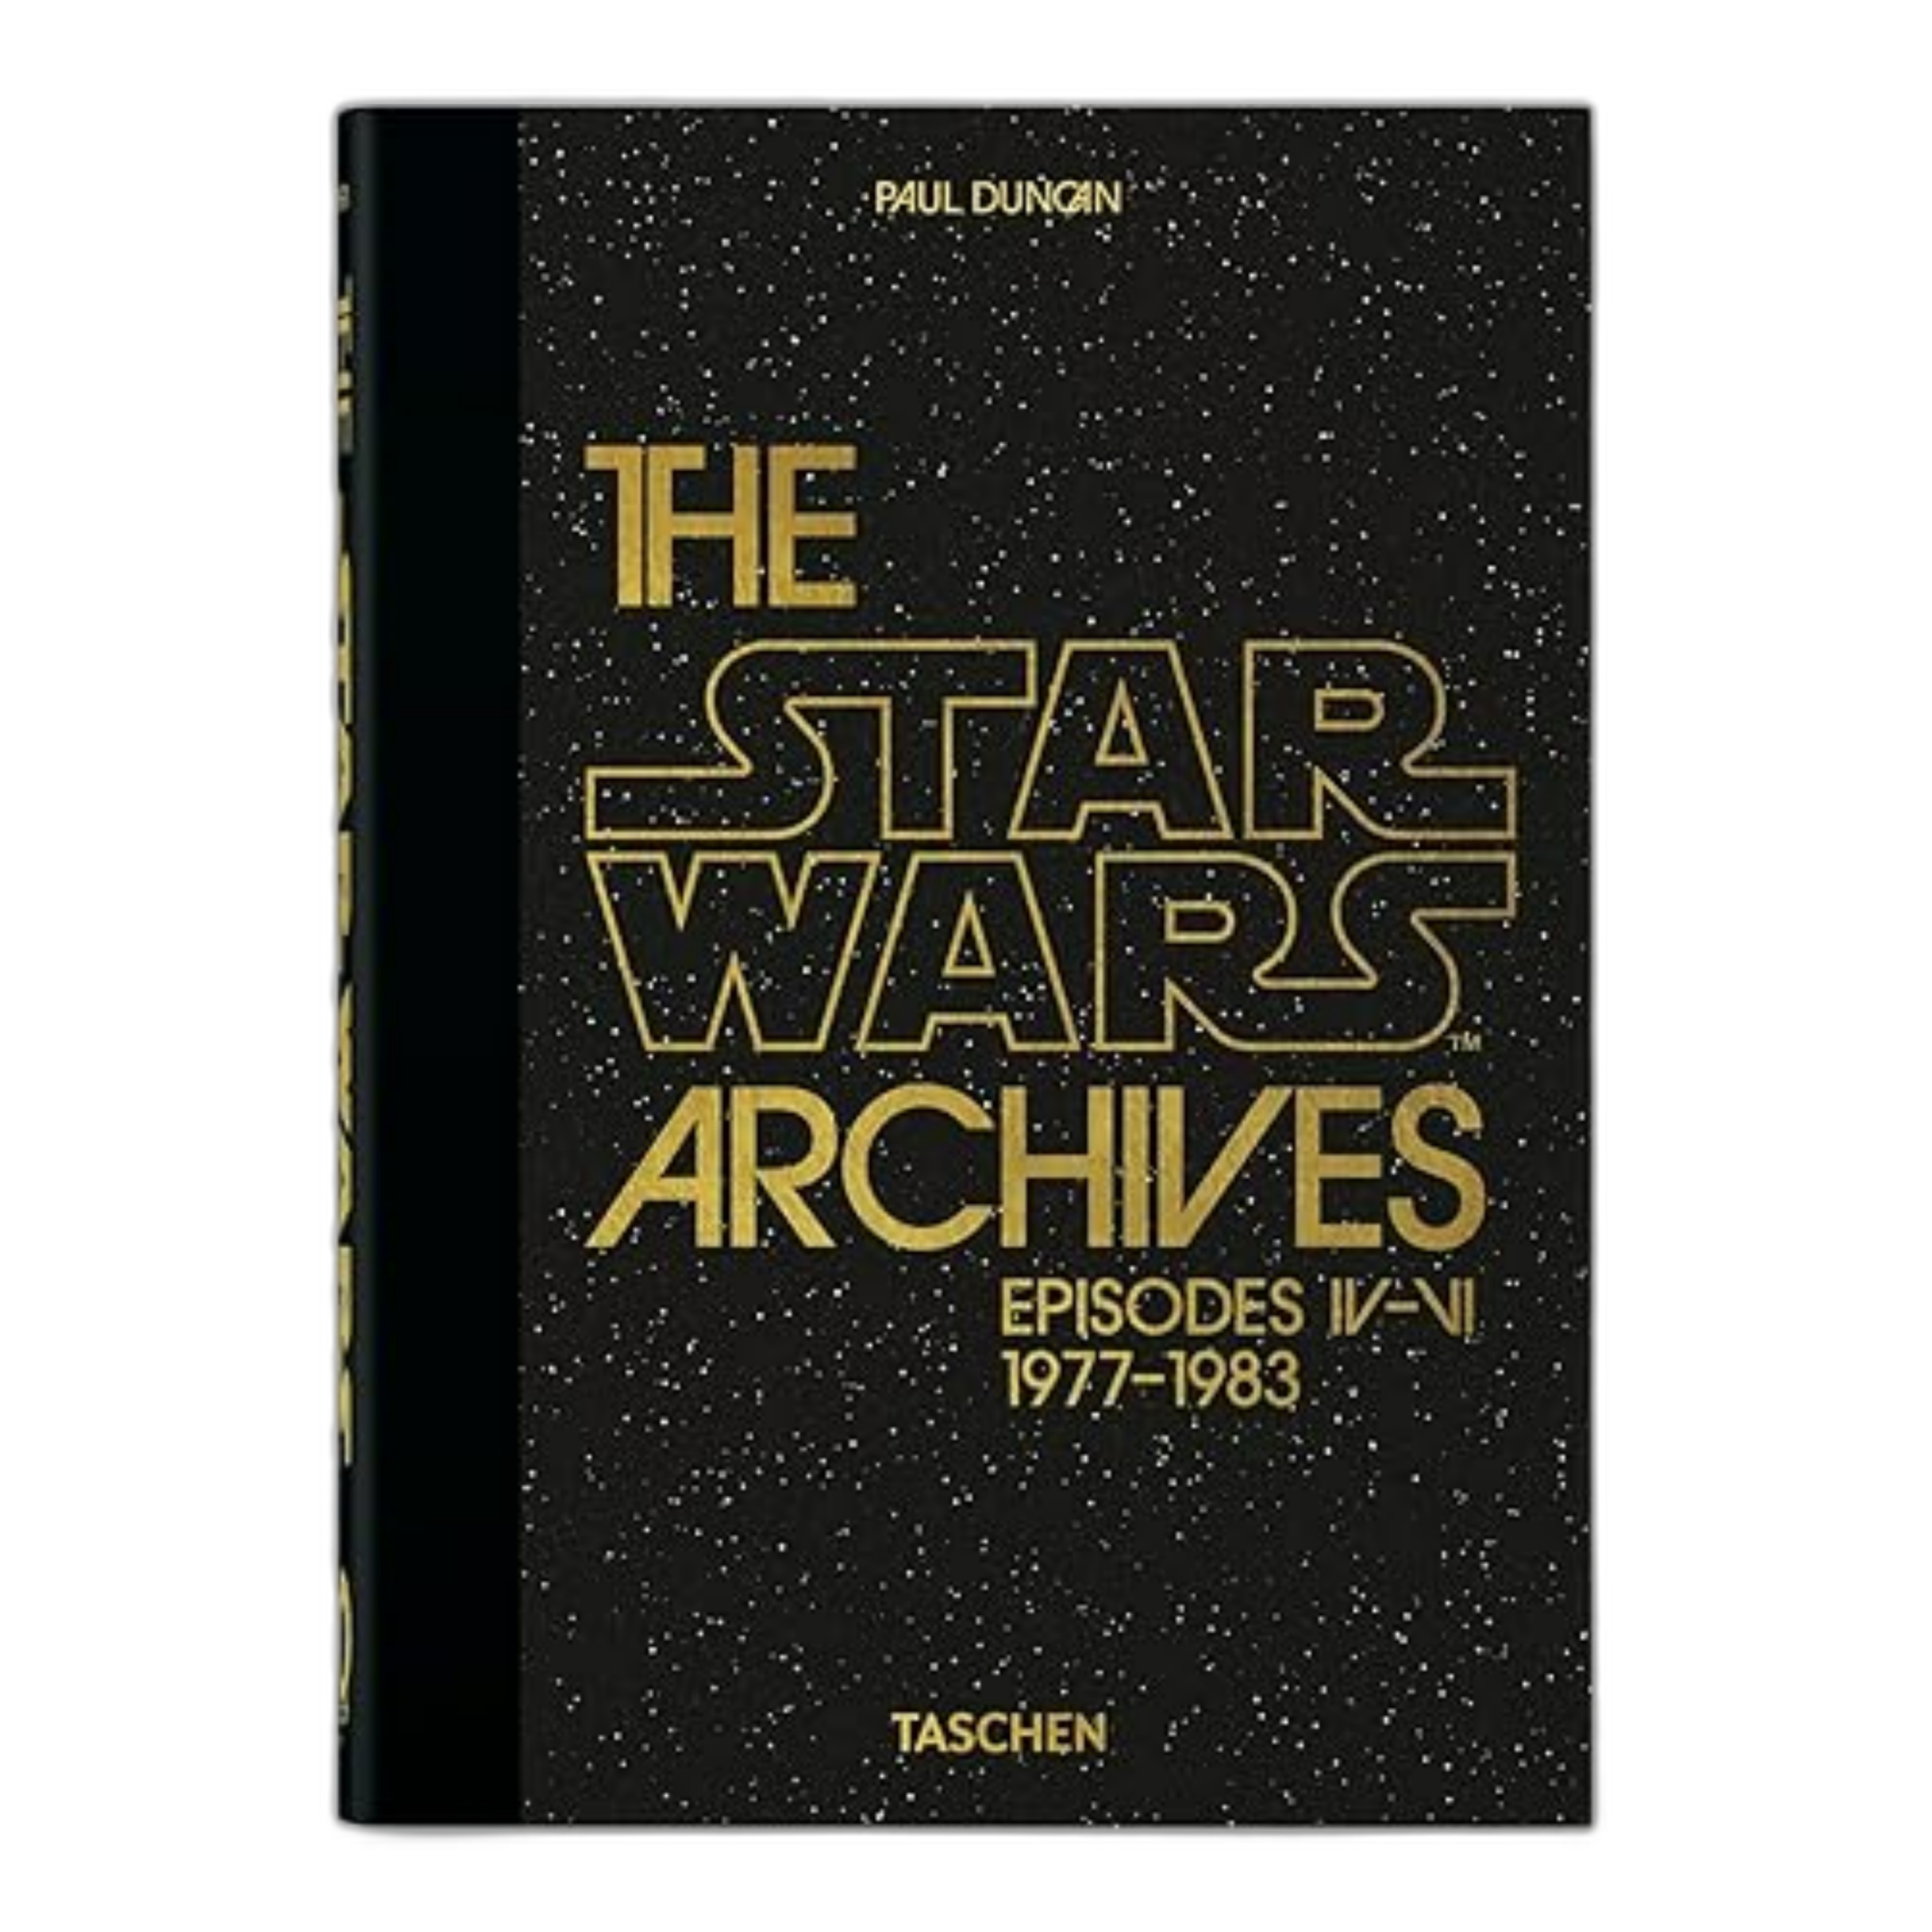 Star Wars Archives book that covers episodes IV-VI, 1977-1983.